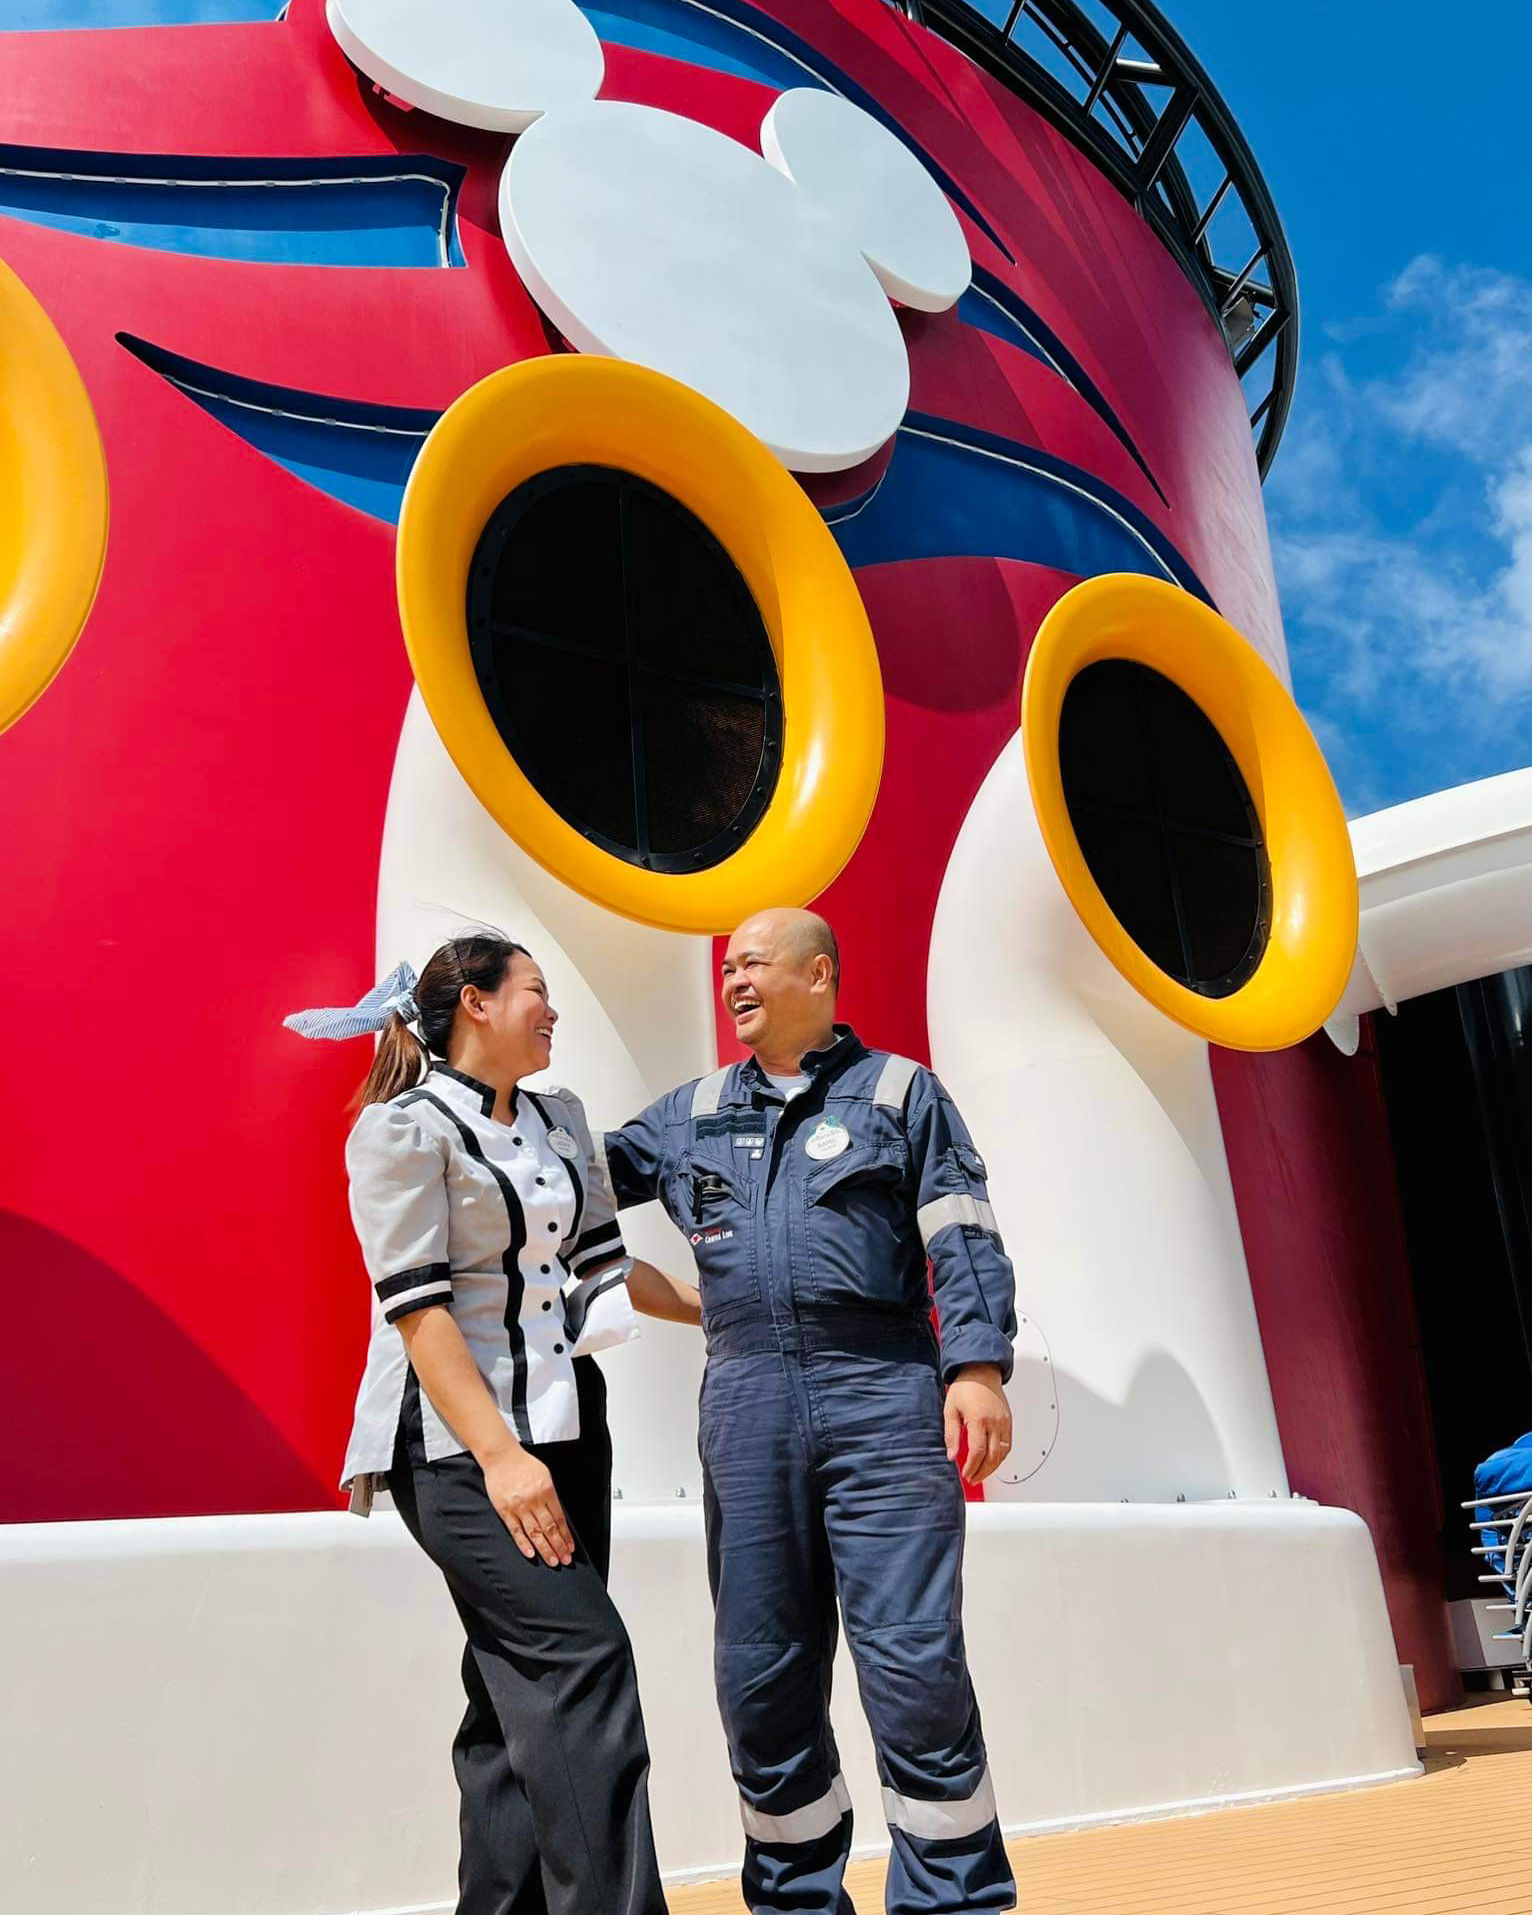 Leovy and Ramil, father and daughter, look at each other and laugh in their costumes on the Disney Fantasy in front of the iconic red, yellow and white funnel